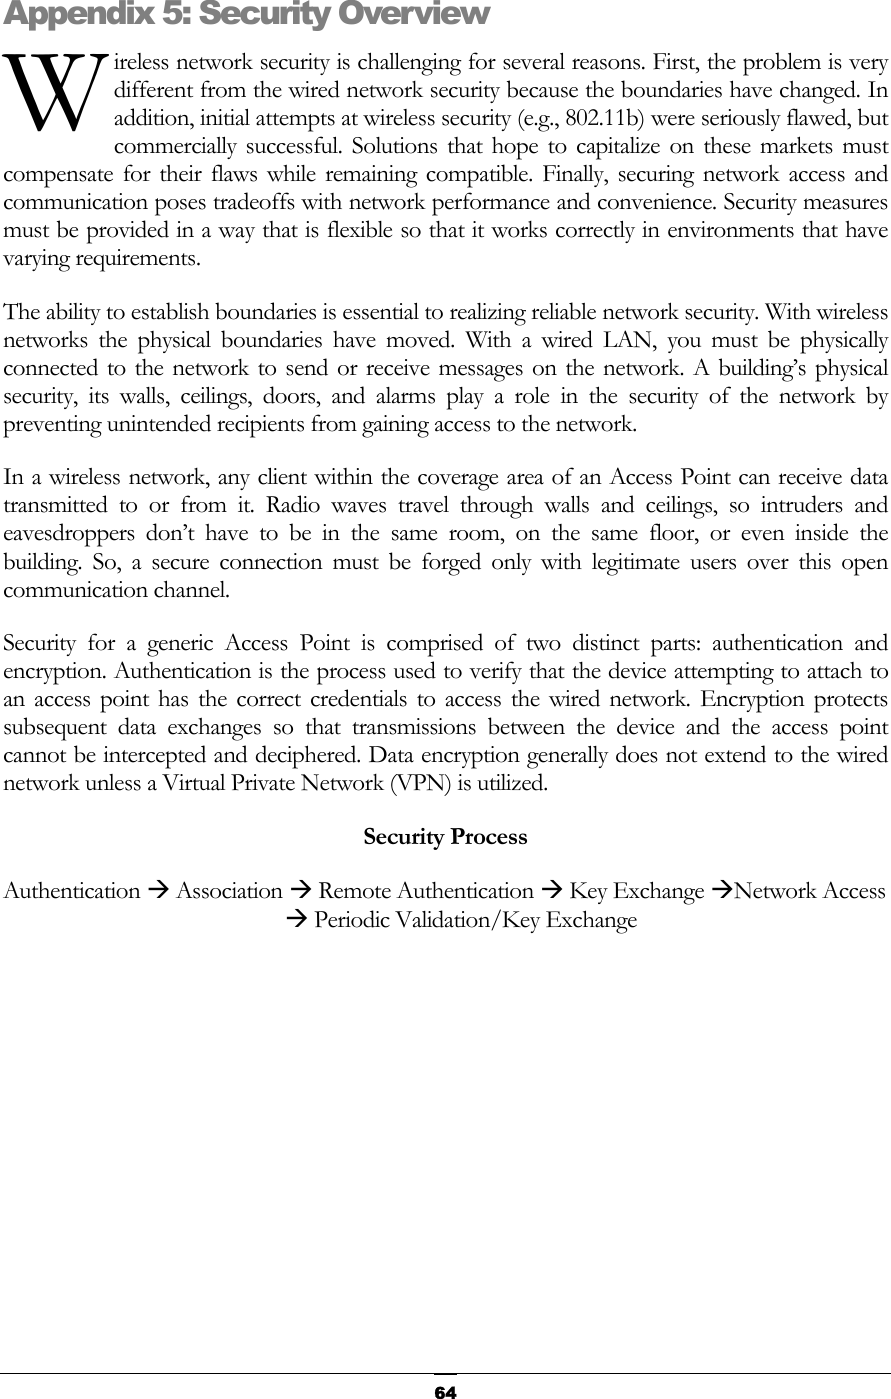   WAppendixireless network security is challenging for several reasons. First, the problem is very different from the wired network security because the boundaries have changed. In addition, initial attempts at wireless security (e.g., 802.11b) were seriously flawed, but commercially successful. Solutions that hope to capitalize on these markets must compensate for their flaws while remaining compatible. Finally, securing network access and communication poses tradeoffs with network performance and convenience. Security measures must be provided in a way that is flexible so that it works correctly in environments that have varying requirements.  5: Security Overview The ability to establish boundaries is essential to realizing reliable network security. With wireless networks the physical boundaries have moved. With a wired LAN, you must be physically connected to the network to send or receive messages on the network. A building’s physical security, its walls, ceilings, doors, and alarms play a role in the security of the network by preventing unintended recipients from gaining access to the network. In a wireless network, any client within the coverage area of an Access Point can receive data transmitted to or from it. Radio waves travel through walls and ceilings, so intruders and eavesdroppers don’t have to be in the same room, on the same floor, or even inside the building. So, a secure connection must be forged only with legitimate users over this open communication channel. Security for a generic Access Point is comprised of two distinct parts: authentication and encryption. Authentication is the process used to verify that the device attempting to attach to an access point has the correct credentials to access the wired network. Encryption protects subsequent data exchanges so that transmissions between the device and the access point cannot be intercepted and deciphered. Data encryption generally does not extend to the wired network unless a Virtual Private Network (VPN) is utilized. Security Process Authentication Æ Association Æ Remote Authentication Æ Key Exchange ÆNetwork Access Æ Periodic Validation/Key Exchange         64